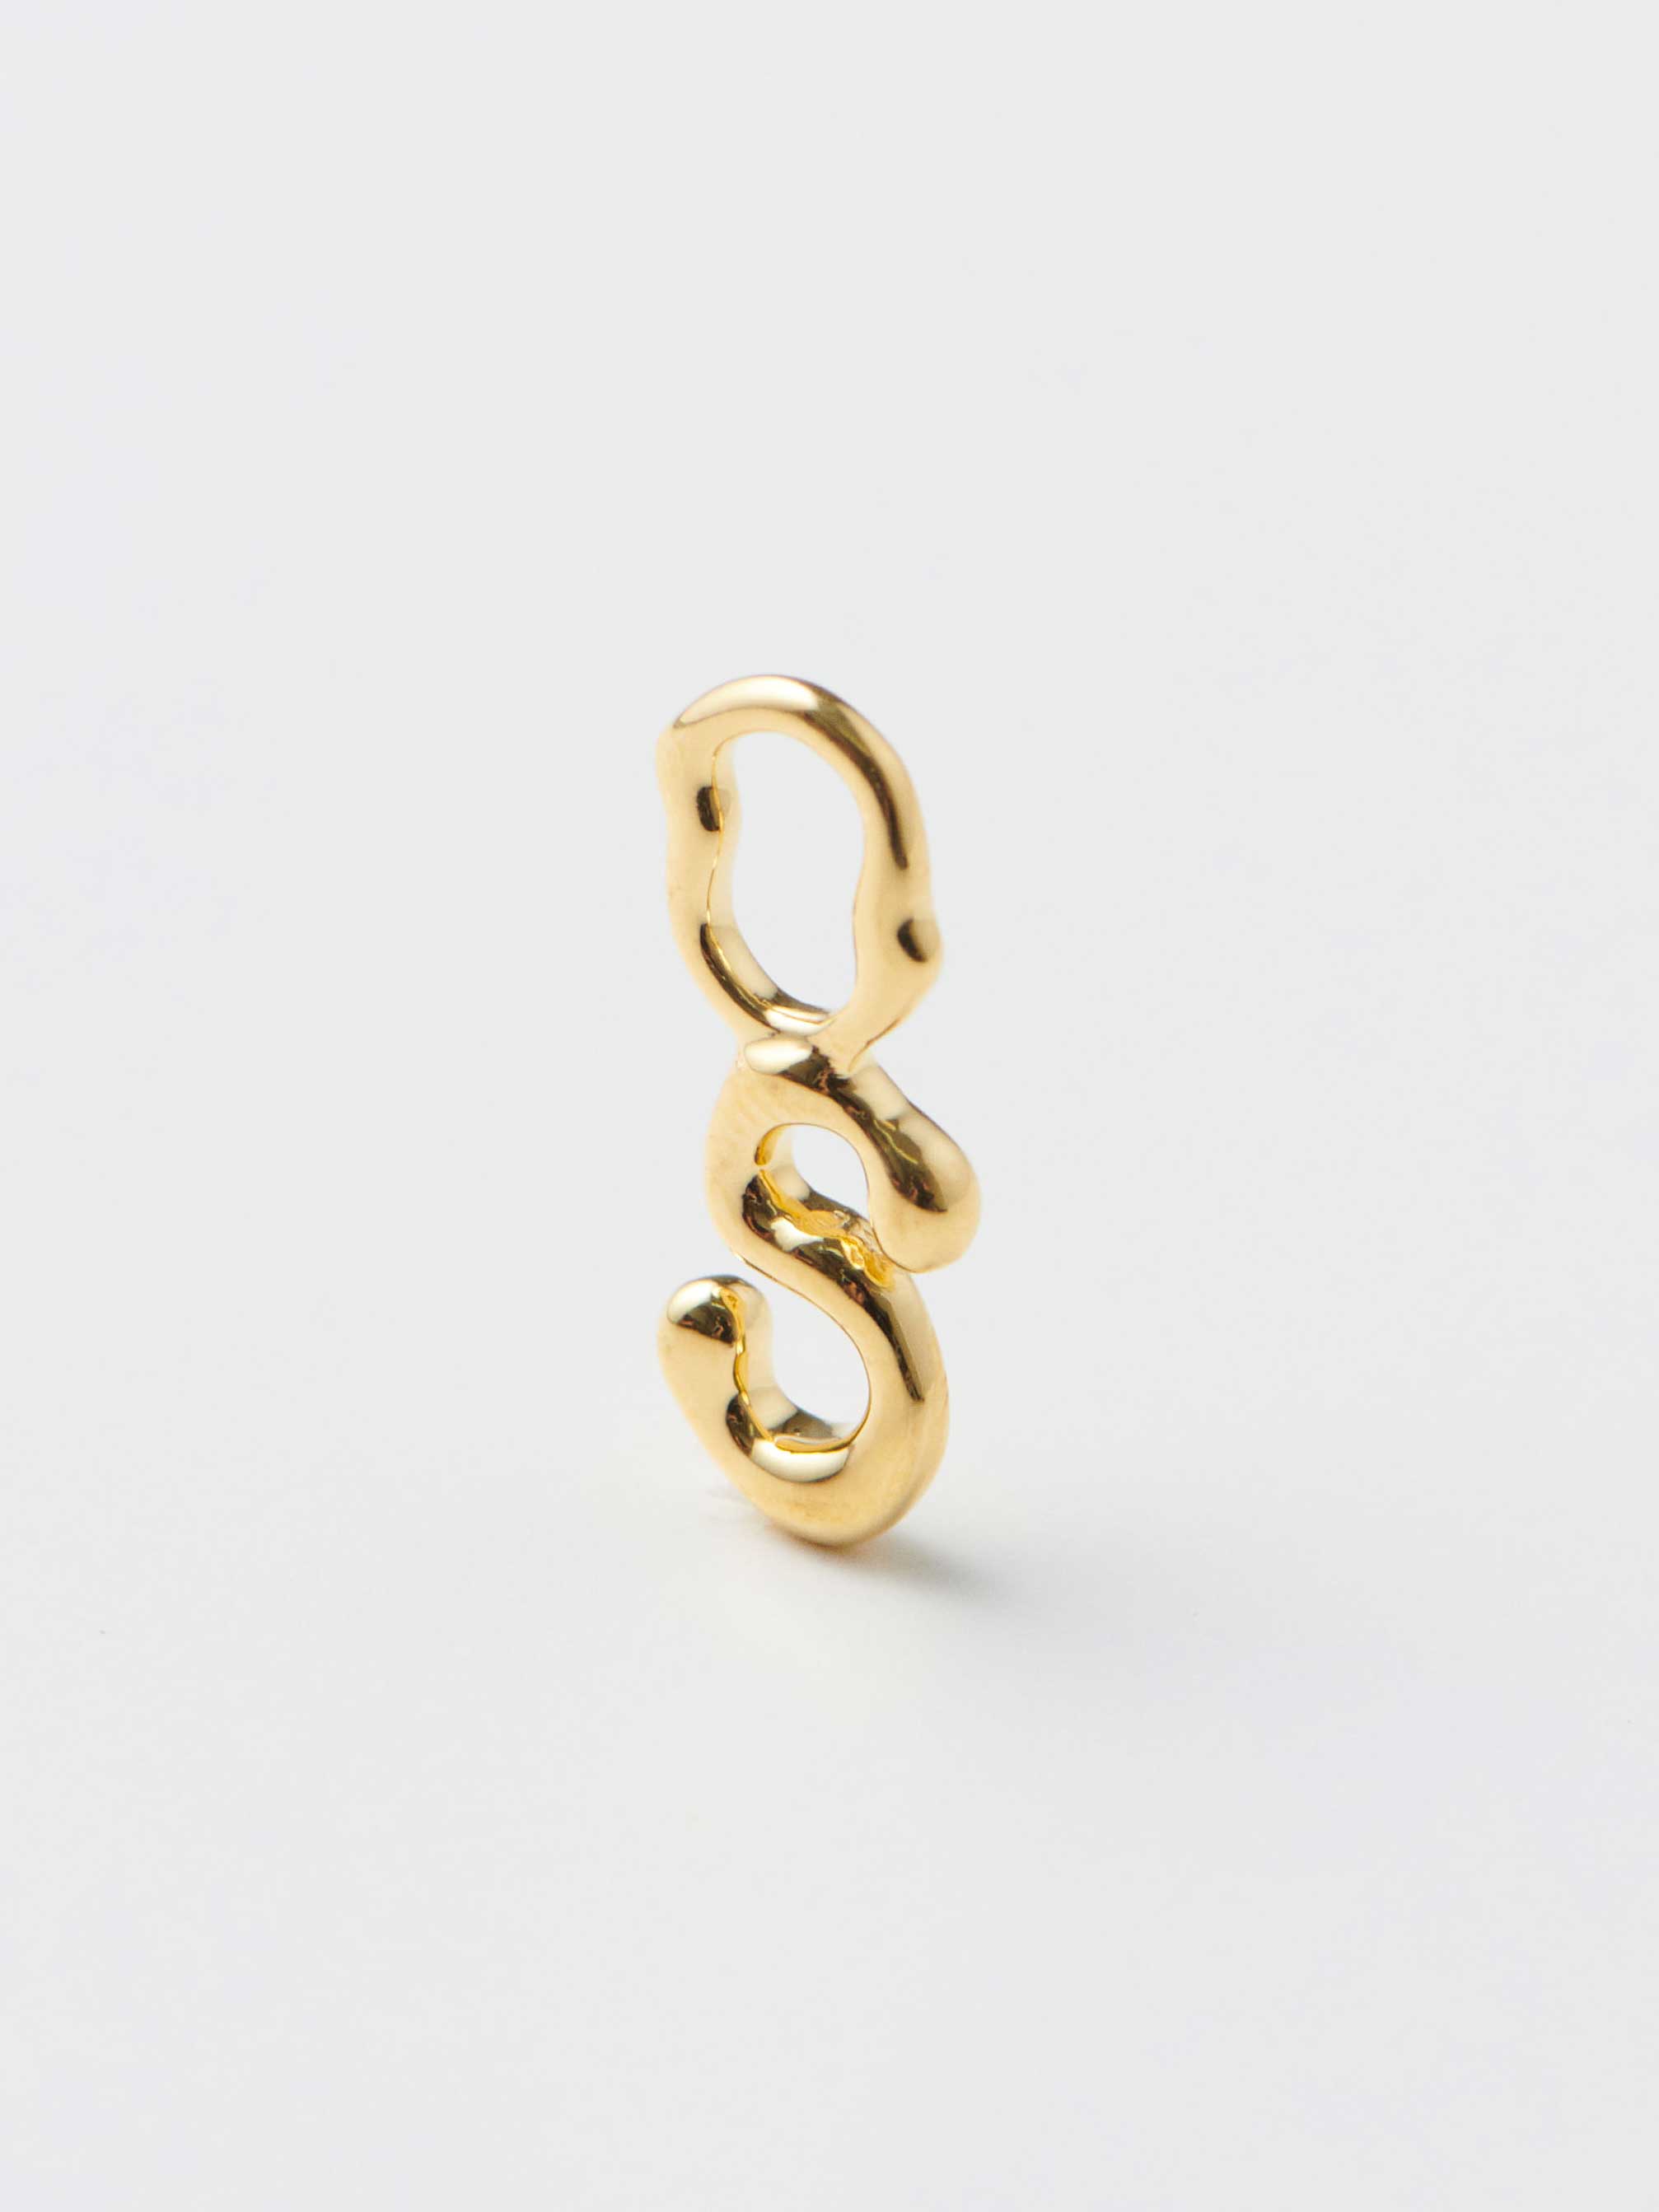 Fluent Letter S Charm - Yellow Gold